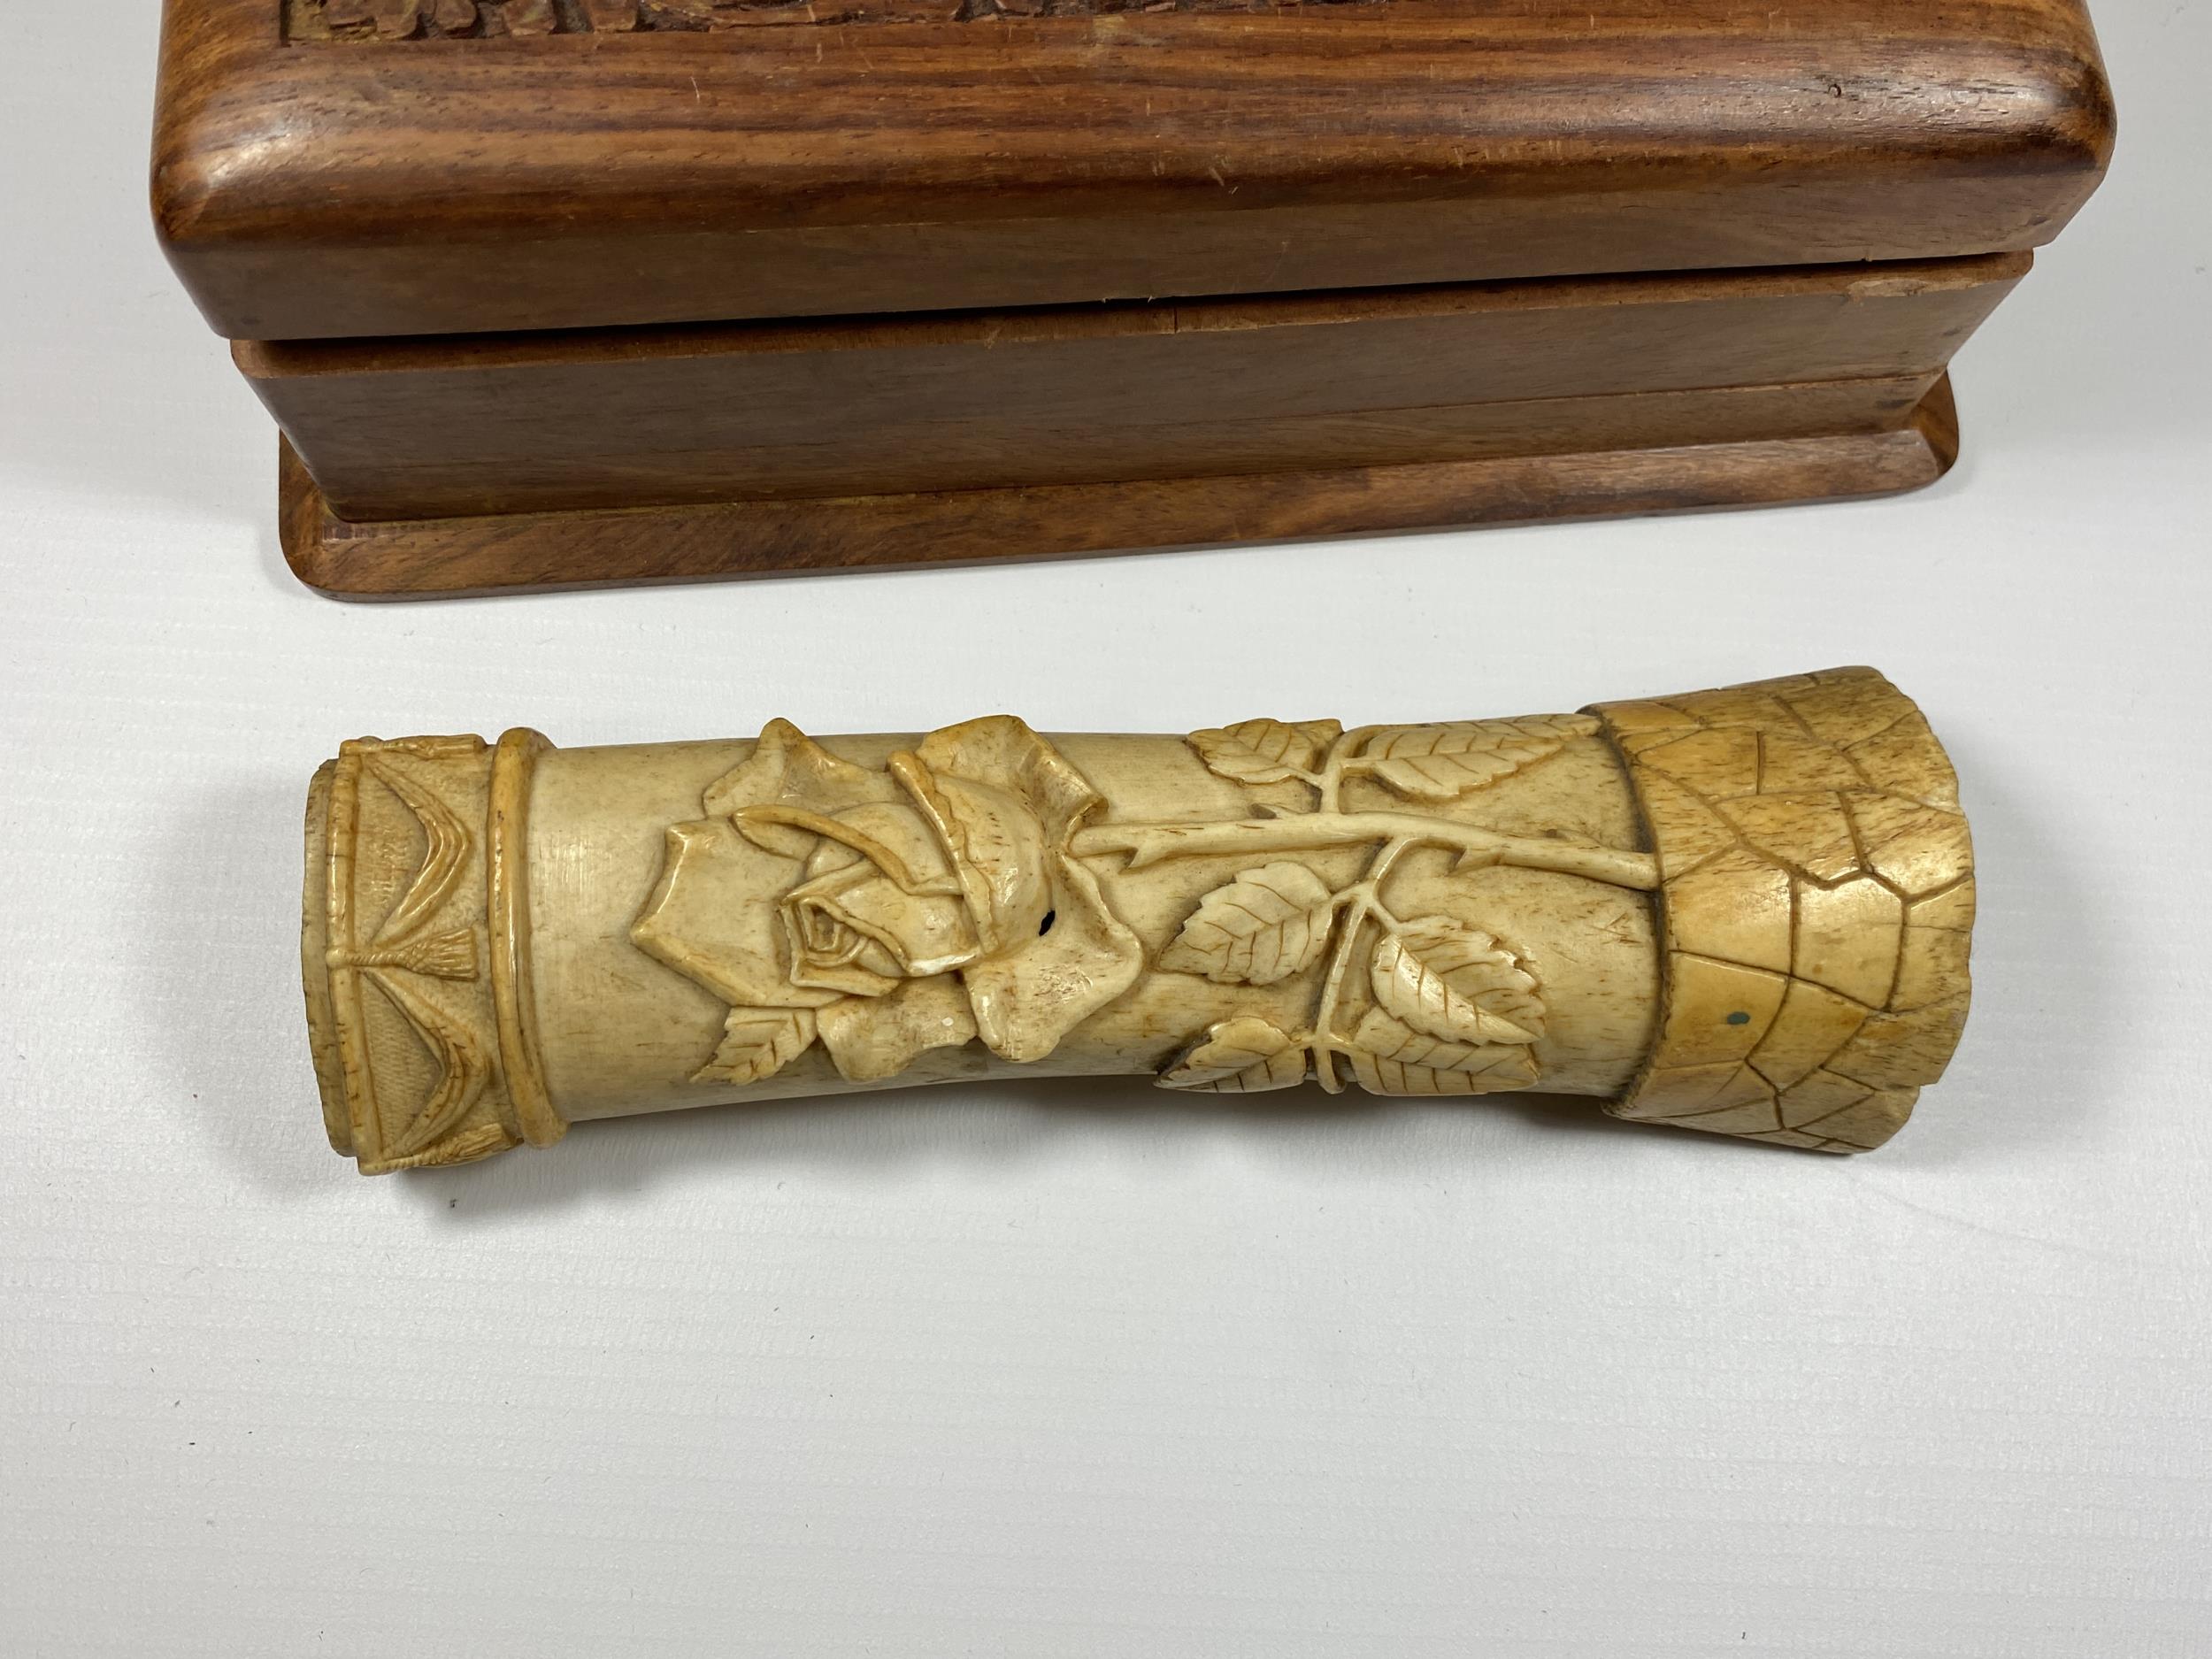 AN ANTIQUE BONE REMEMBRANCE CARVING TOGETHER WITH A CARVED WOODEN BOX - Image 3 of 3